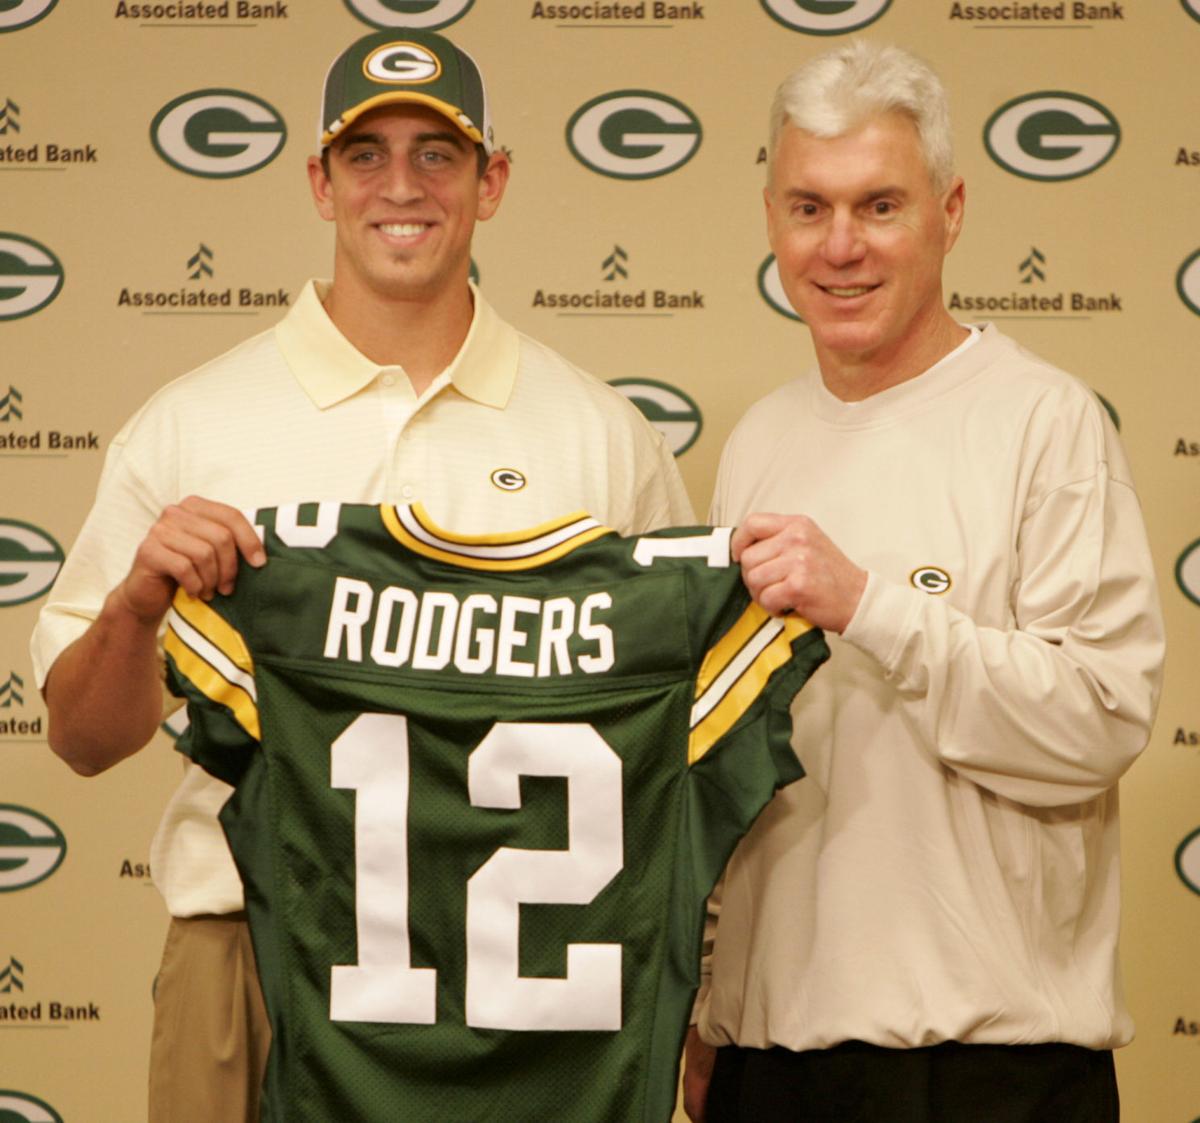 I would like for the Packer fans to think the Packers are in good hands' —  As GM, underappreciated Ted Thompson delivered on that hope | Pro football  | madison.com